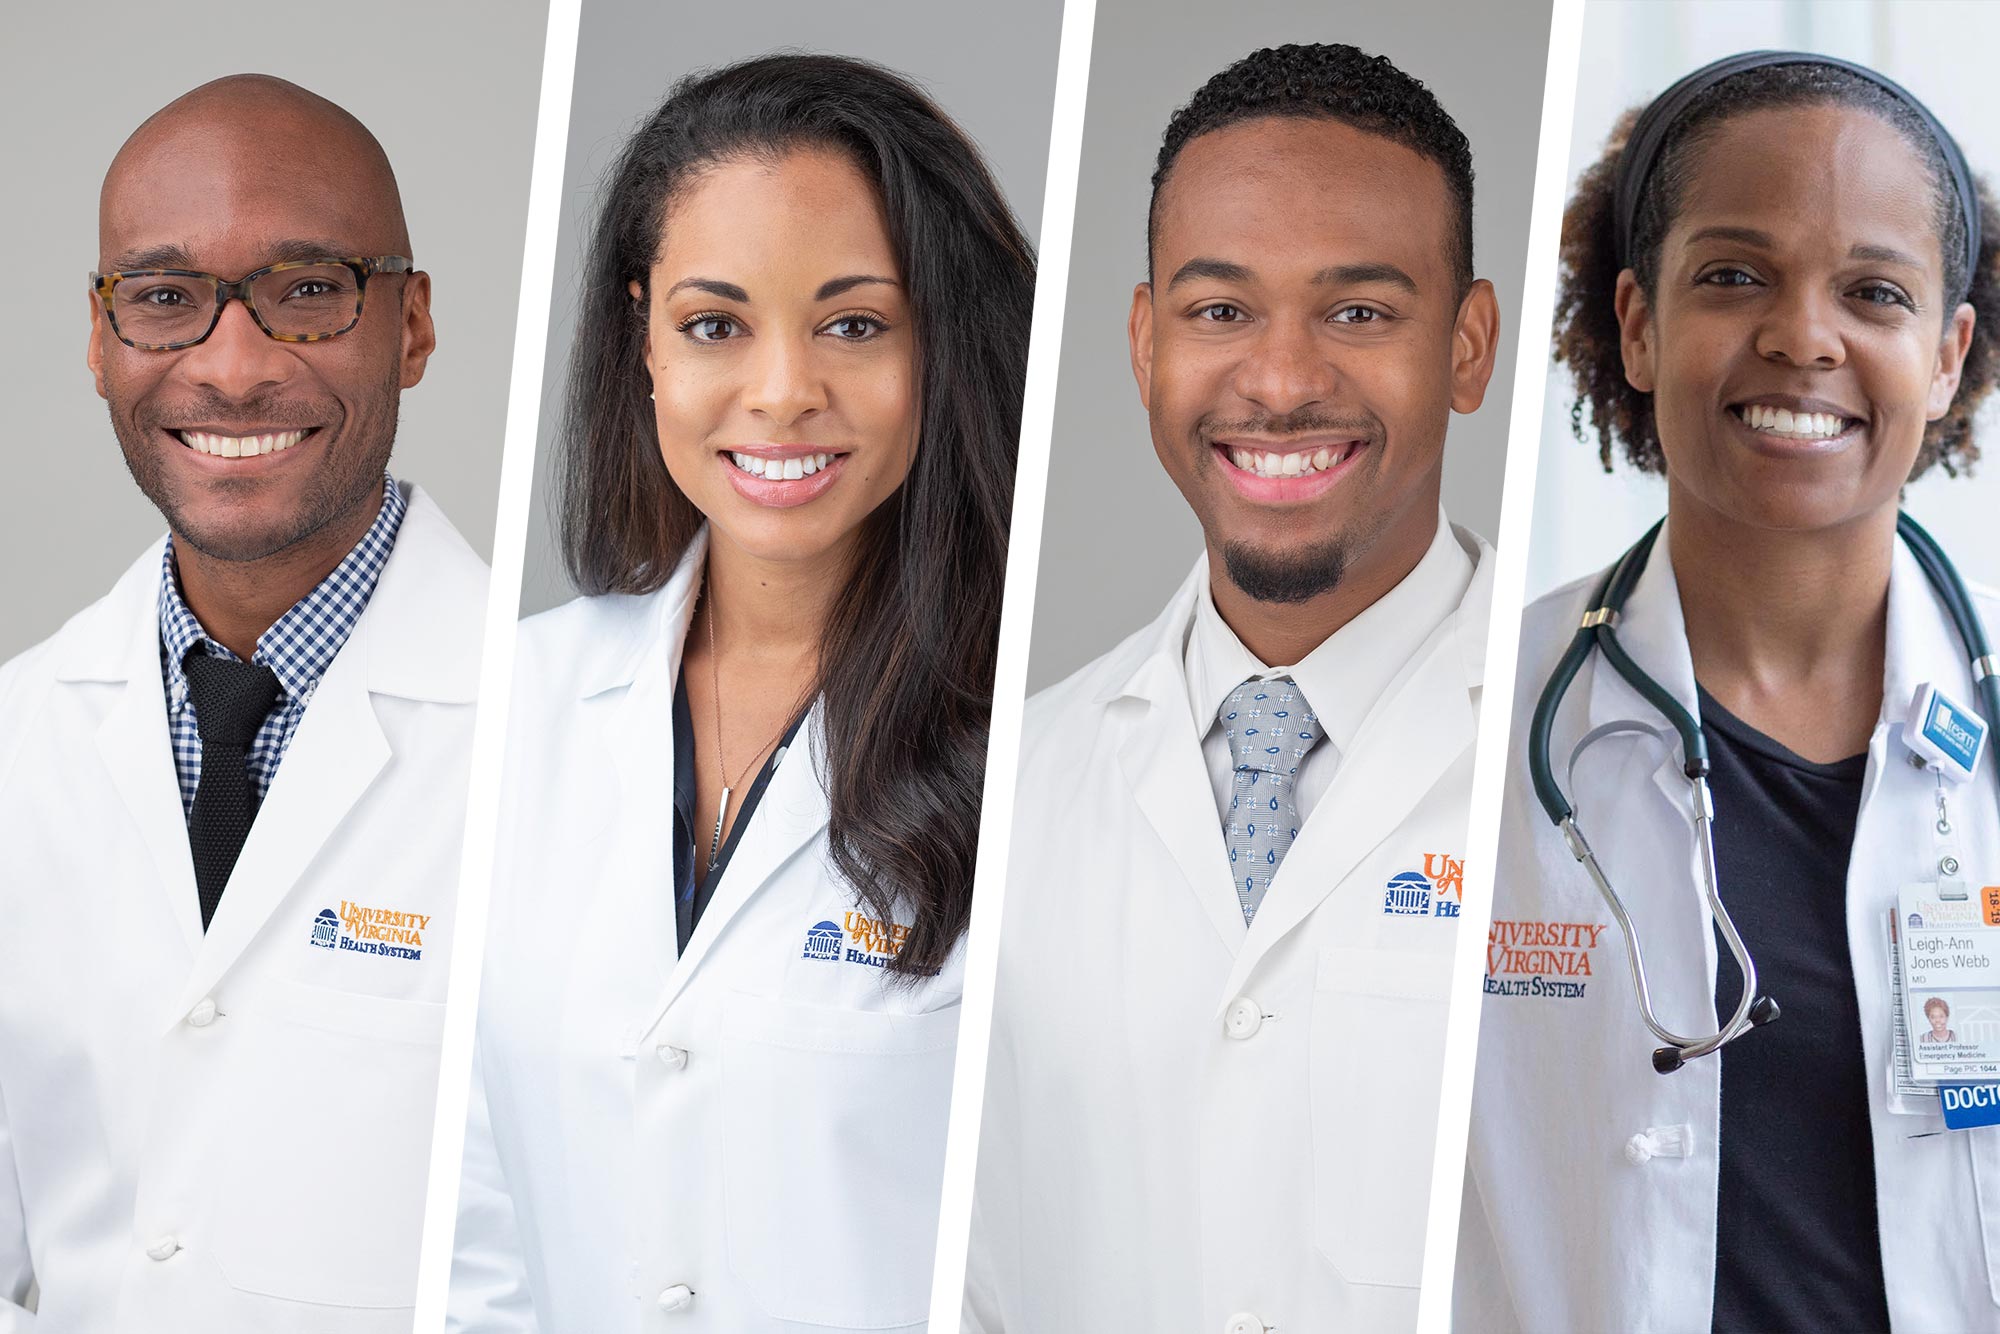 Headshots From left to right, Dr. Taison Bell, Dr. Ebony Hilton-Buchholz, Dr. Bryant Cameron Webb and Dr. Leigh-Ann Webb.